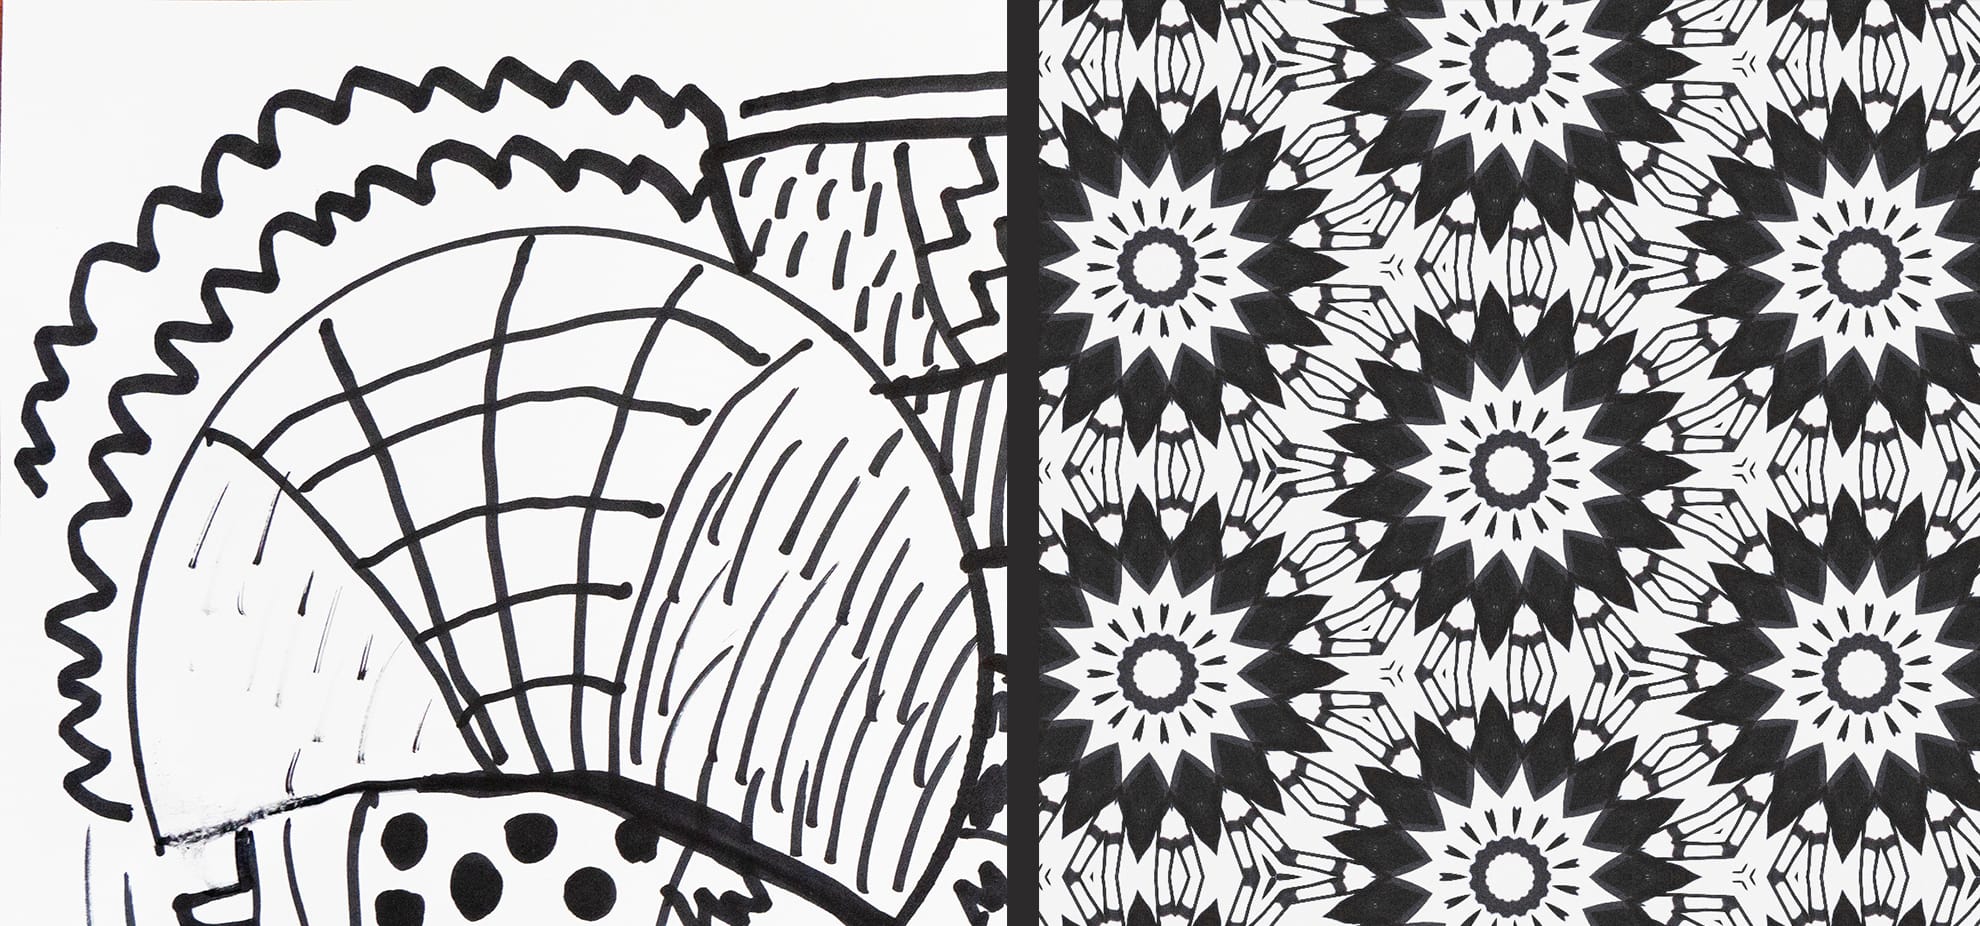 Handdrawing + Digital Pattern Design = Ultimate Relaxation